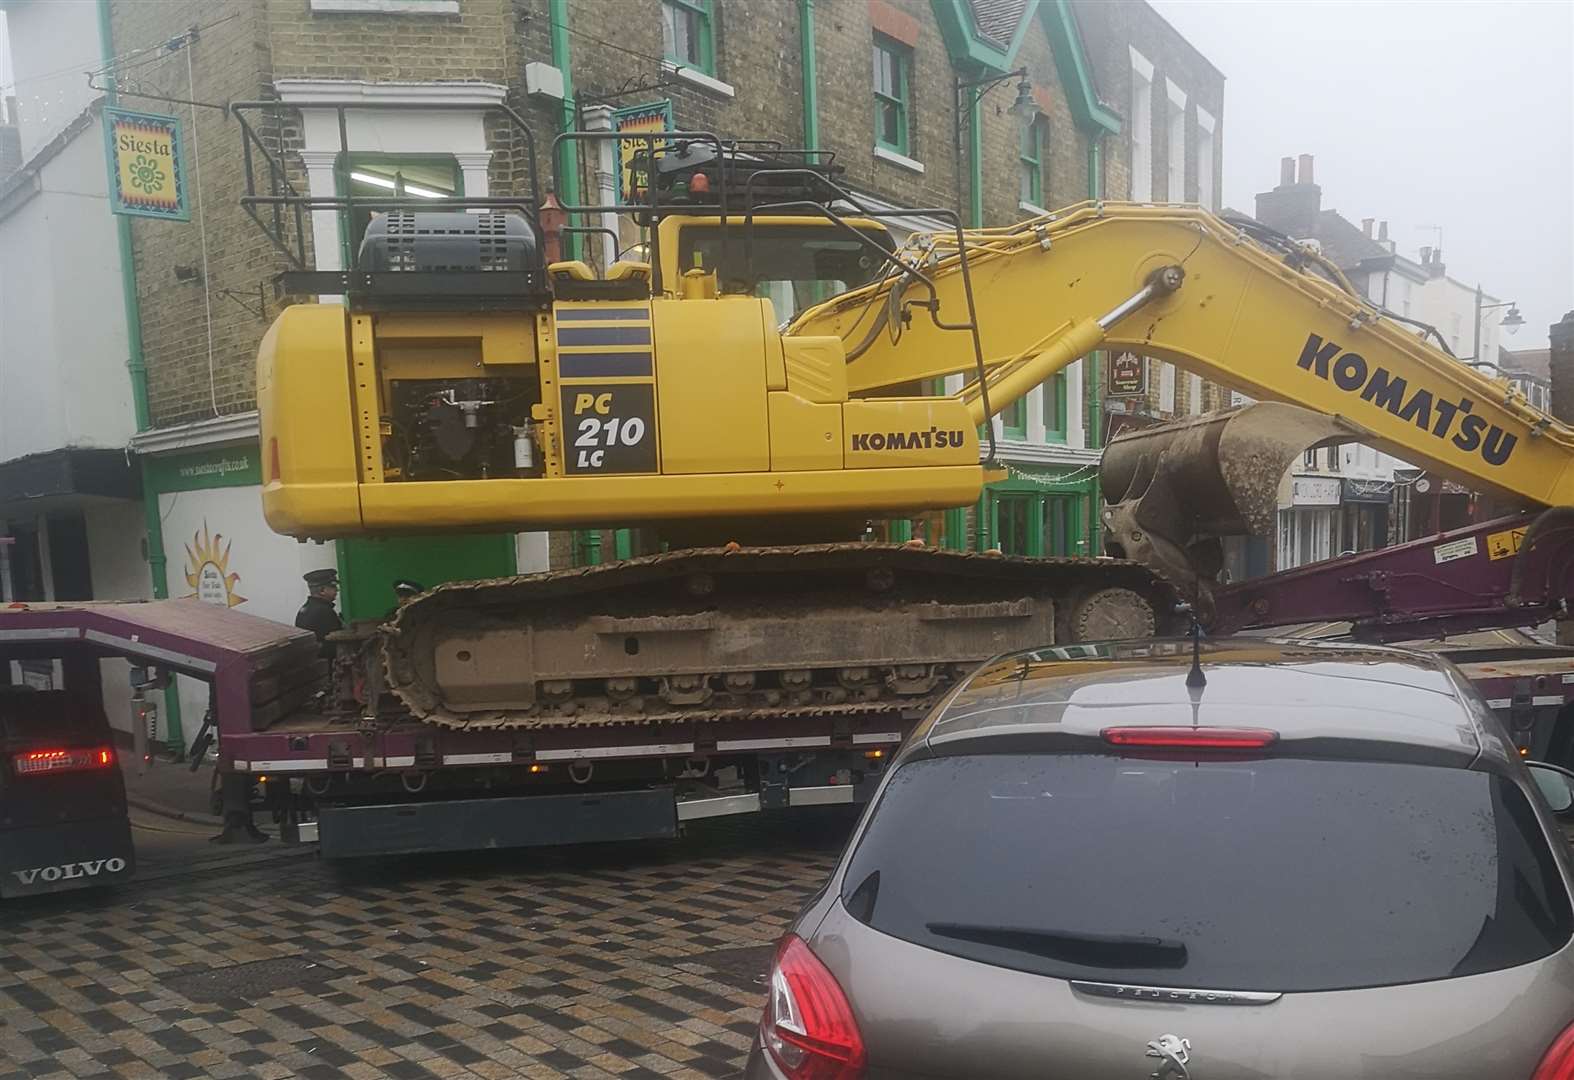 The lorry was carrying a digger when it got stuck in Canterbury